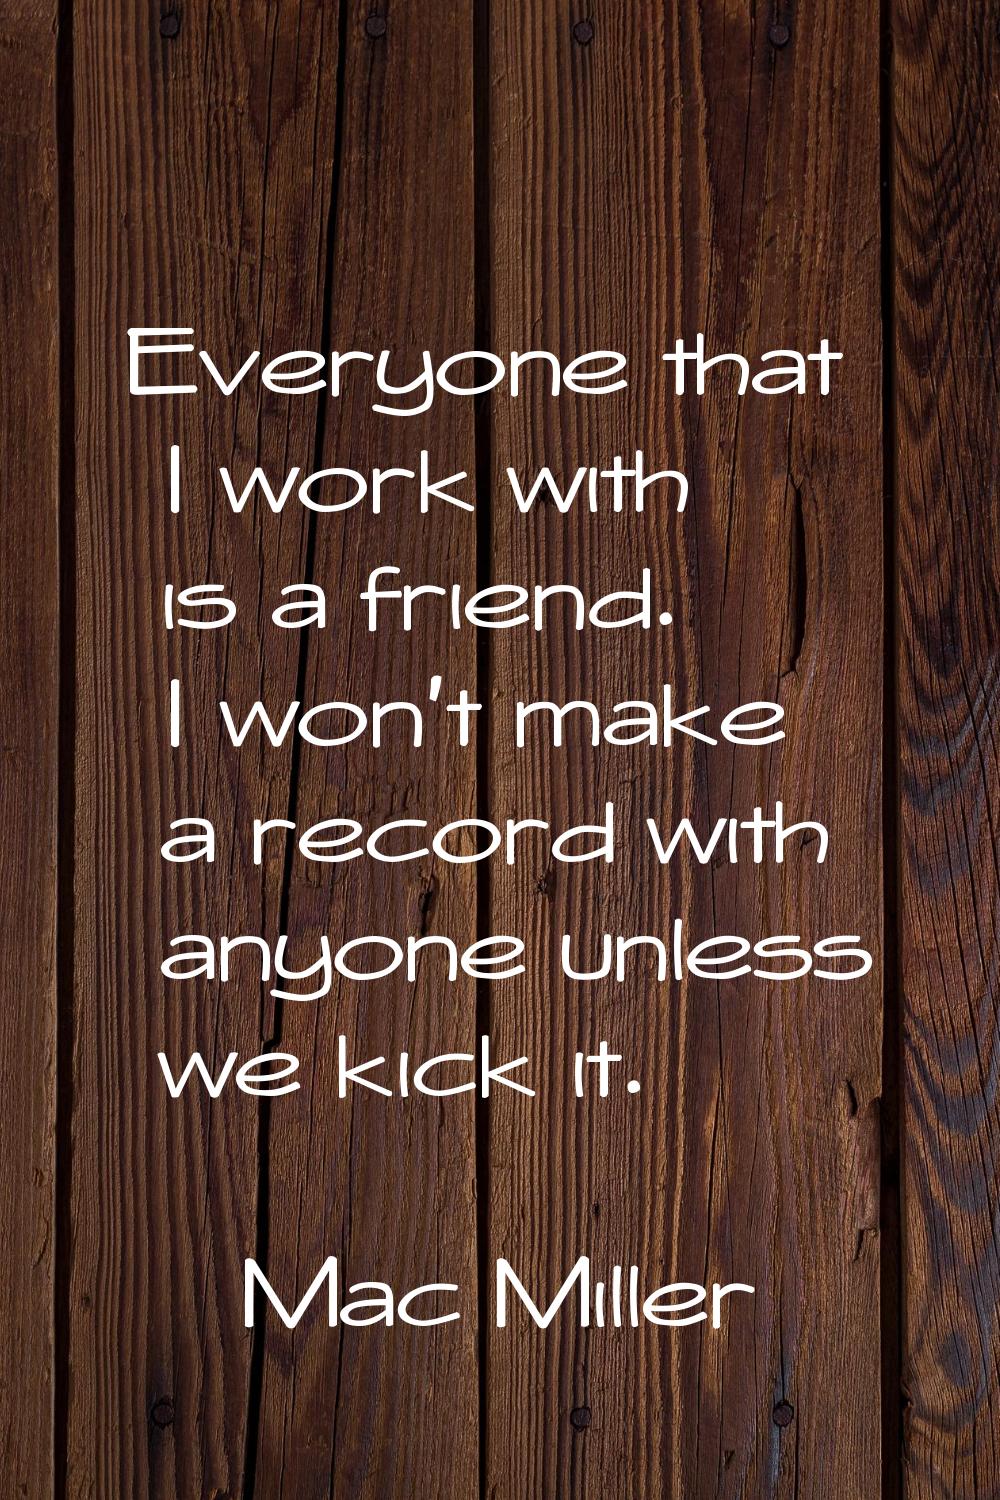 Everyone that I work with is a friend. I won't make a record with anyone unless we kick it.